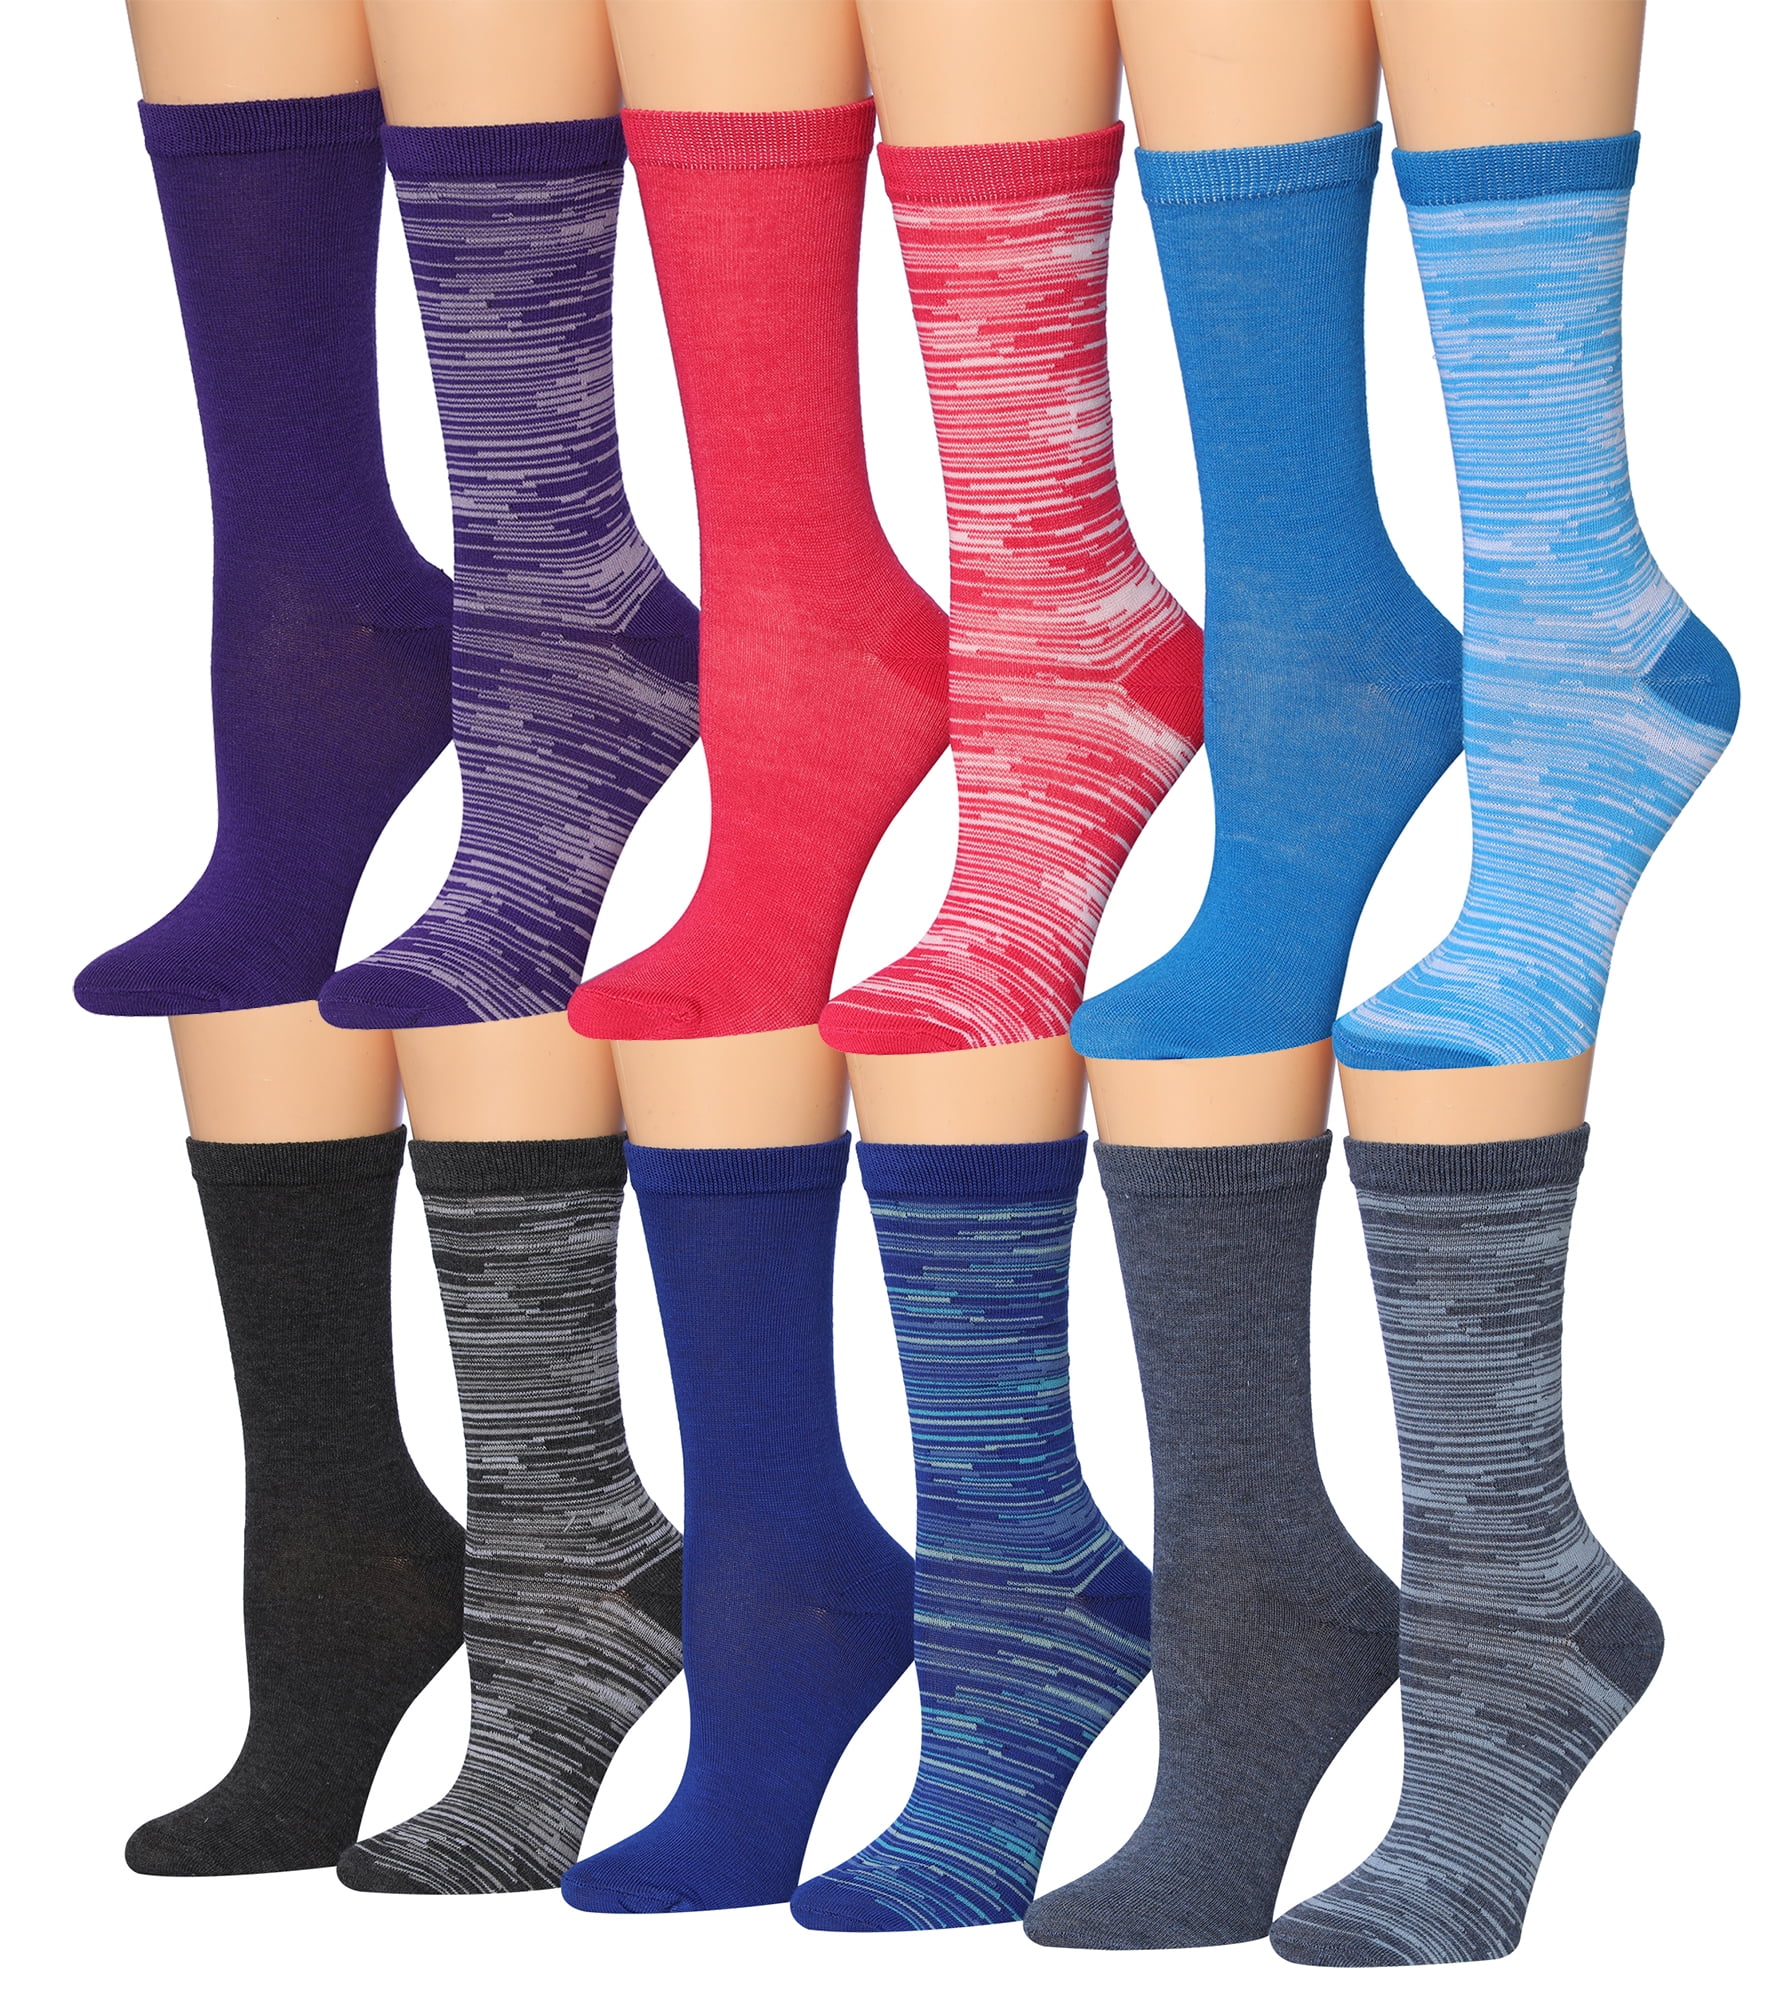 Colorfut Women's 12 Pairs Colorful Patterned Crew Socks WC77-AB ...